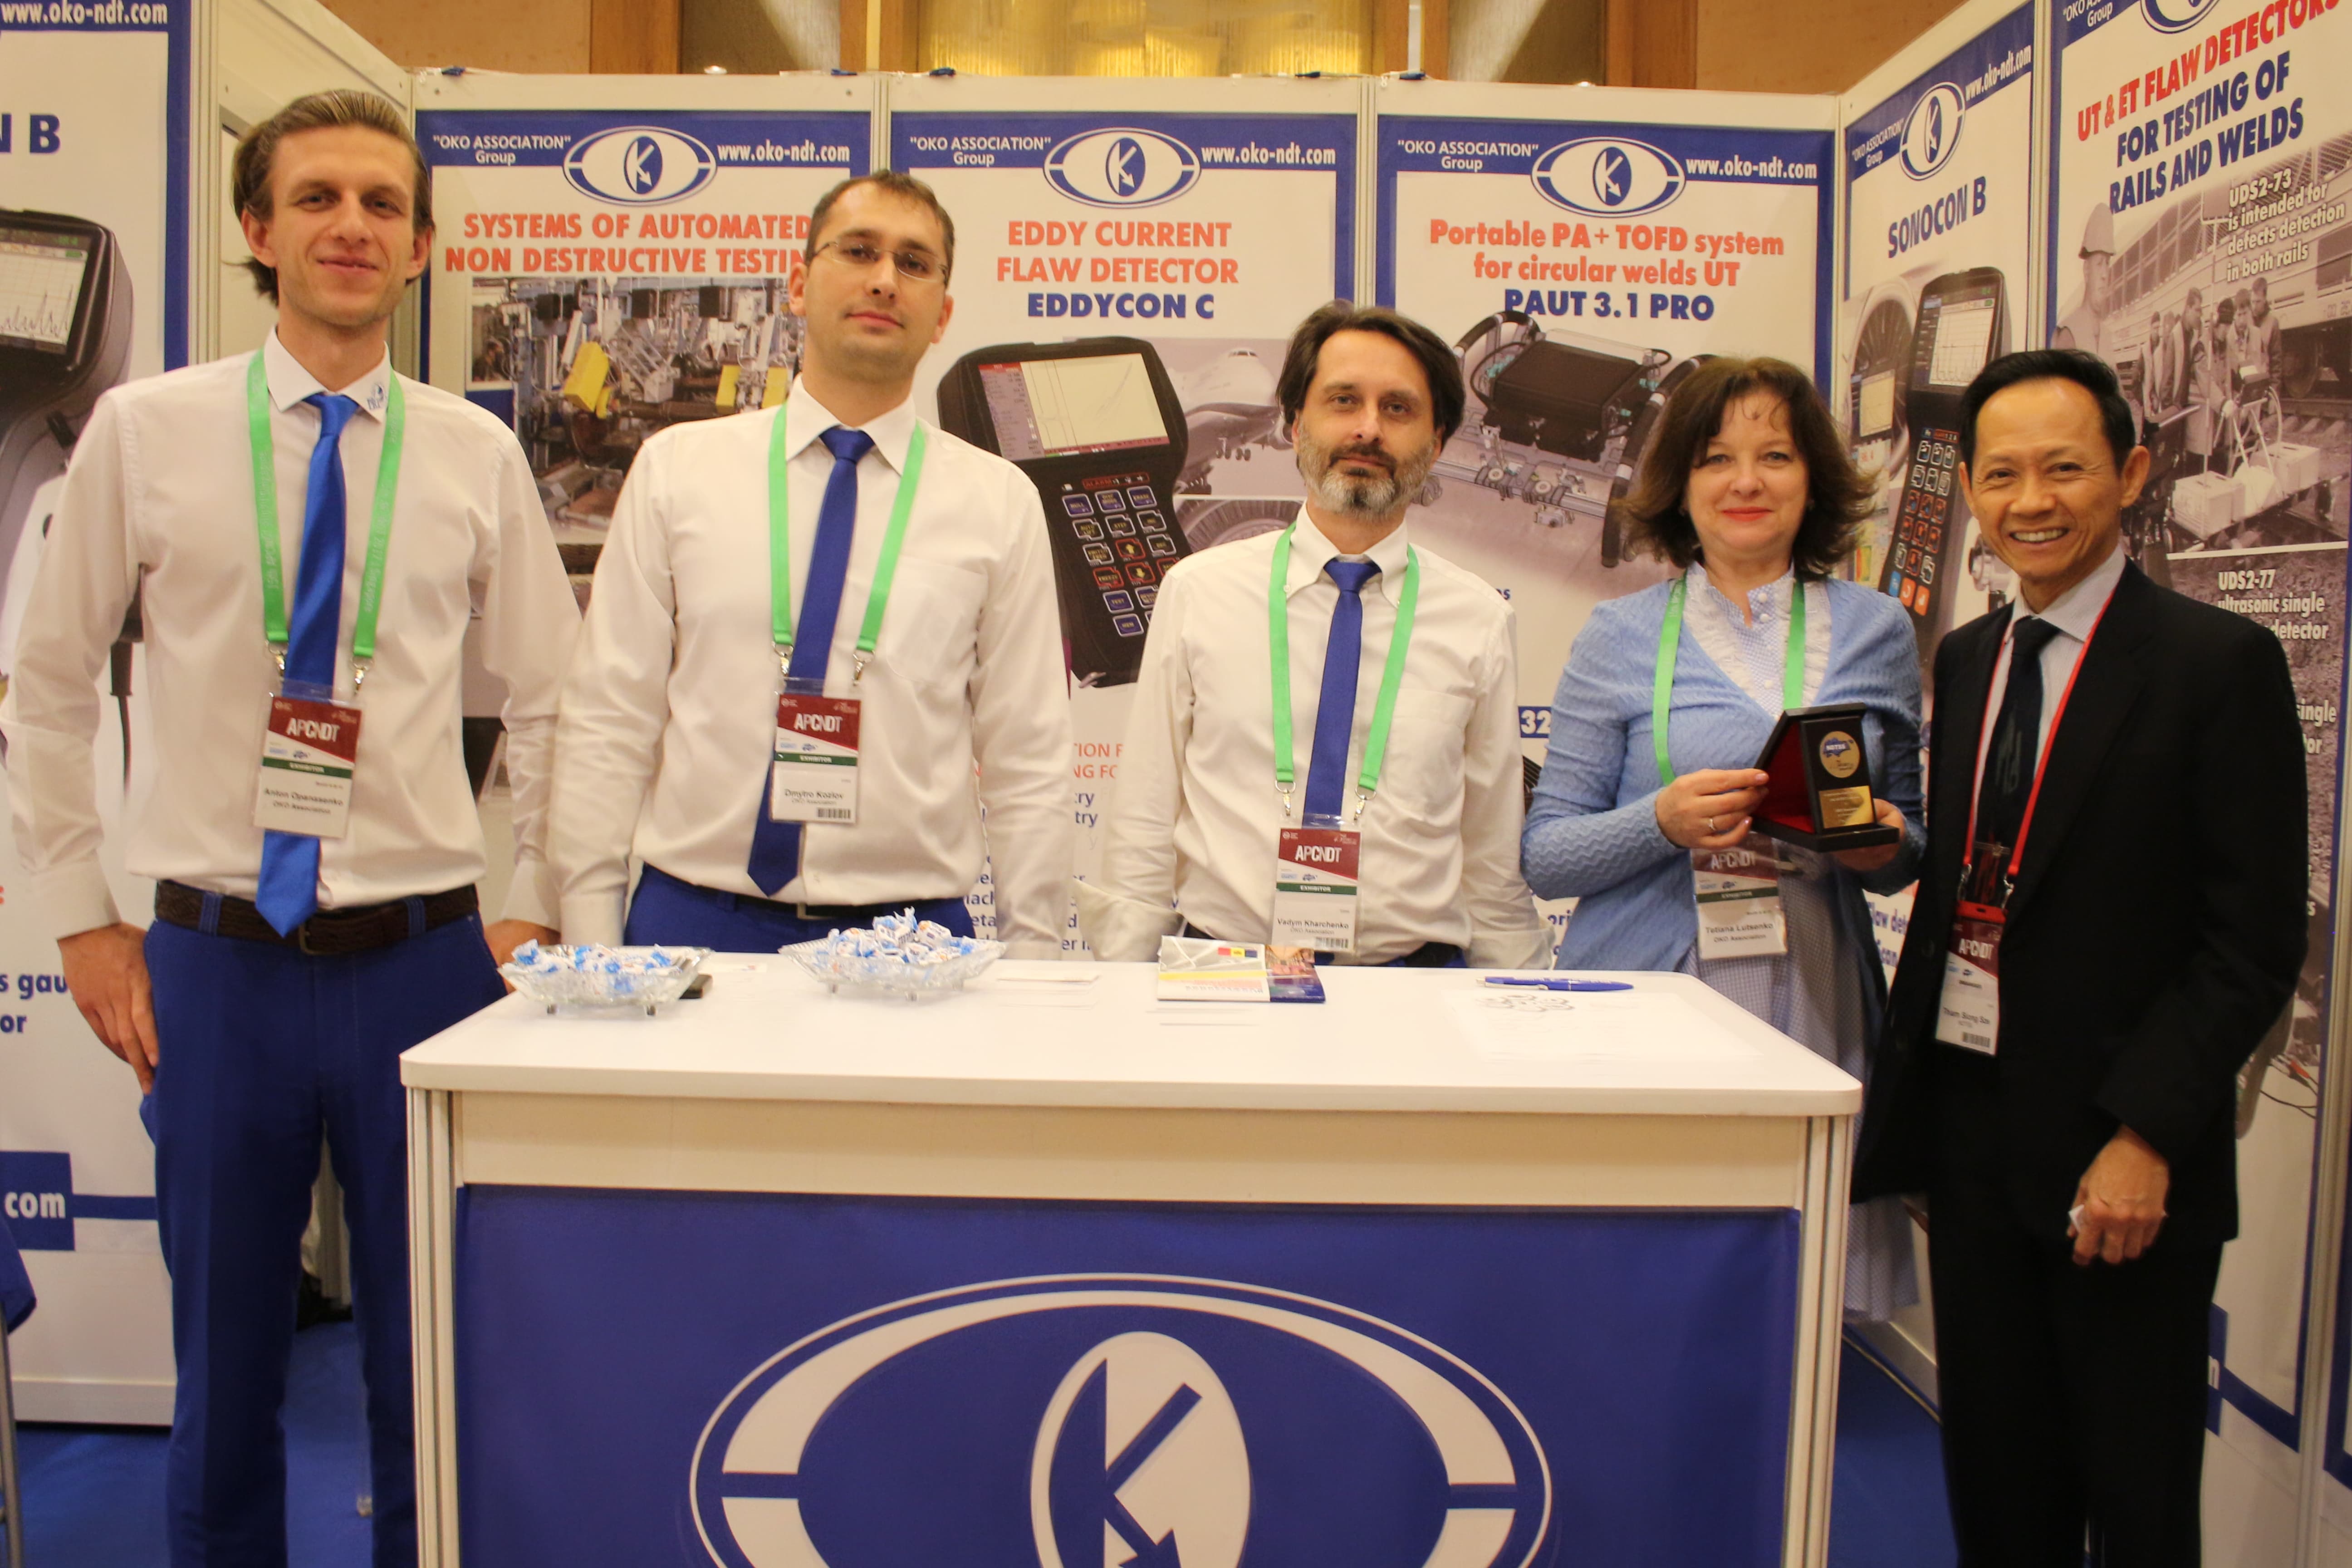 Delegates of OKOndt GROUP represent their booth at the 15th Asia Pacific Conference NDT, Singapore